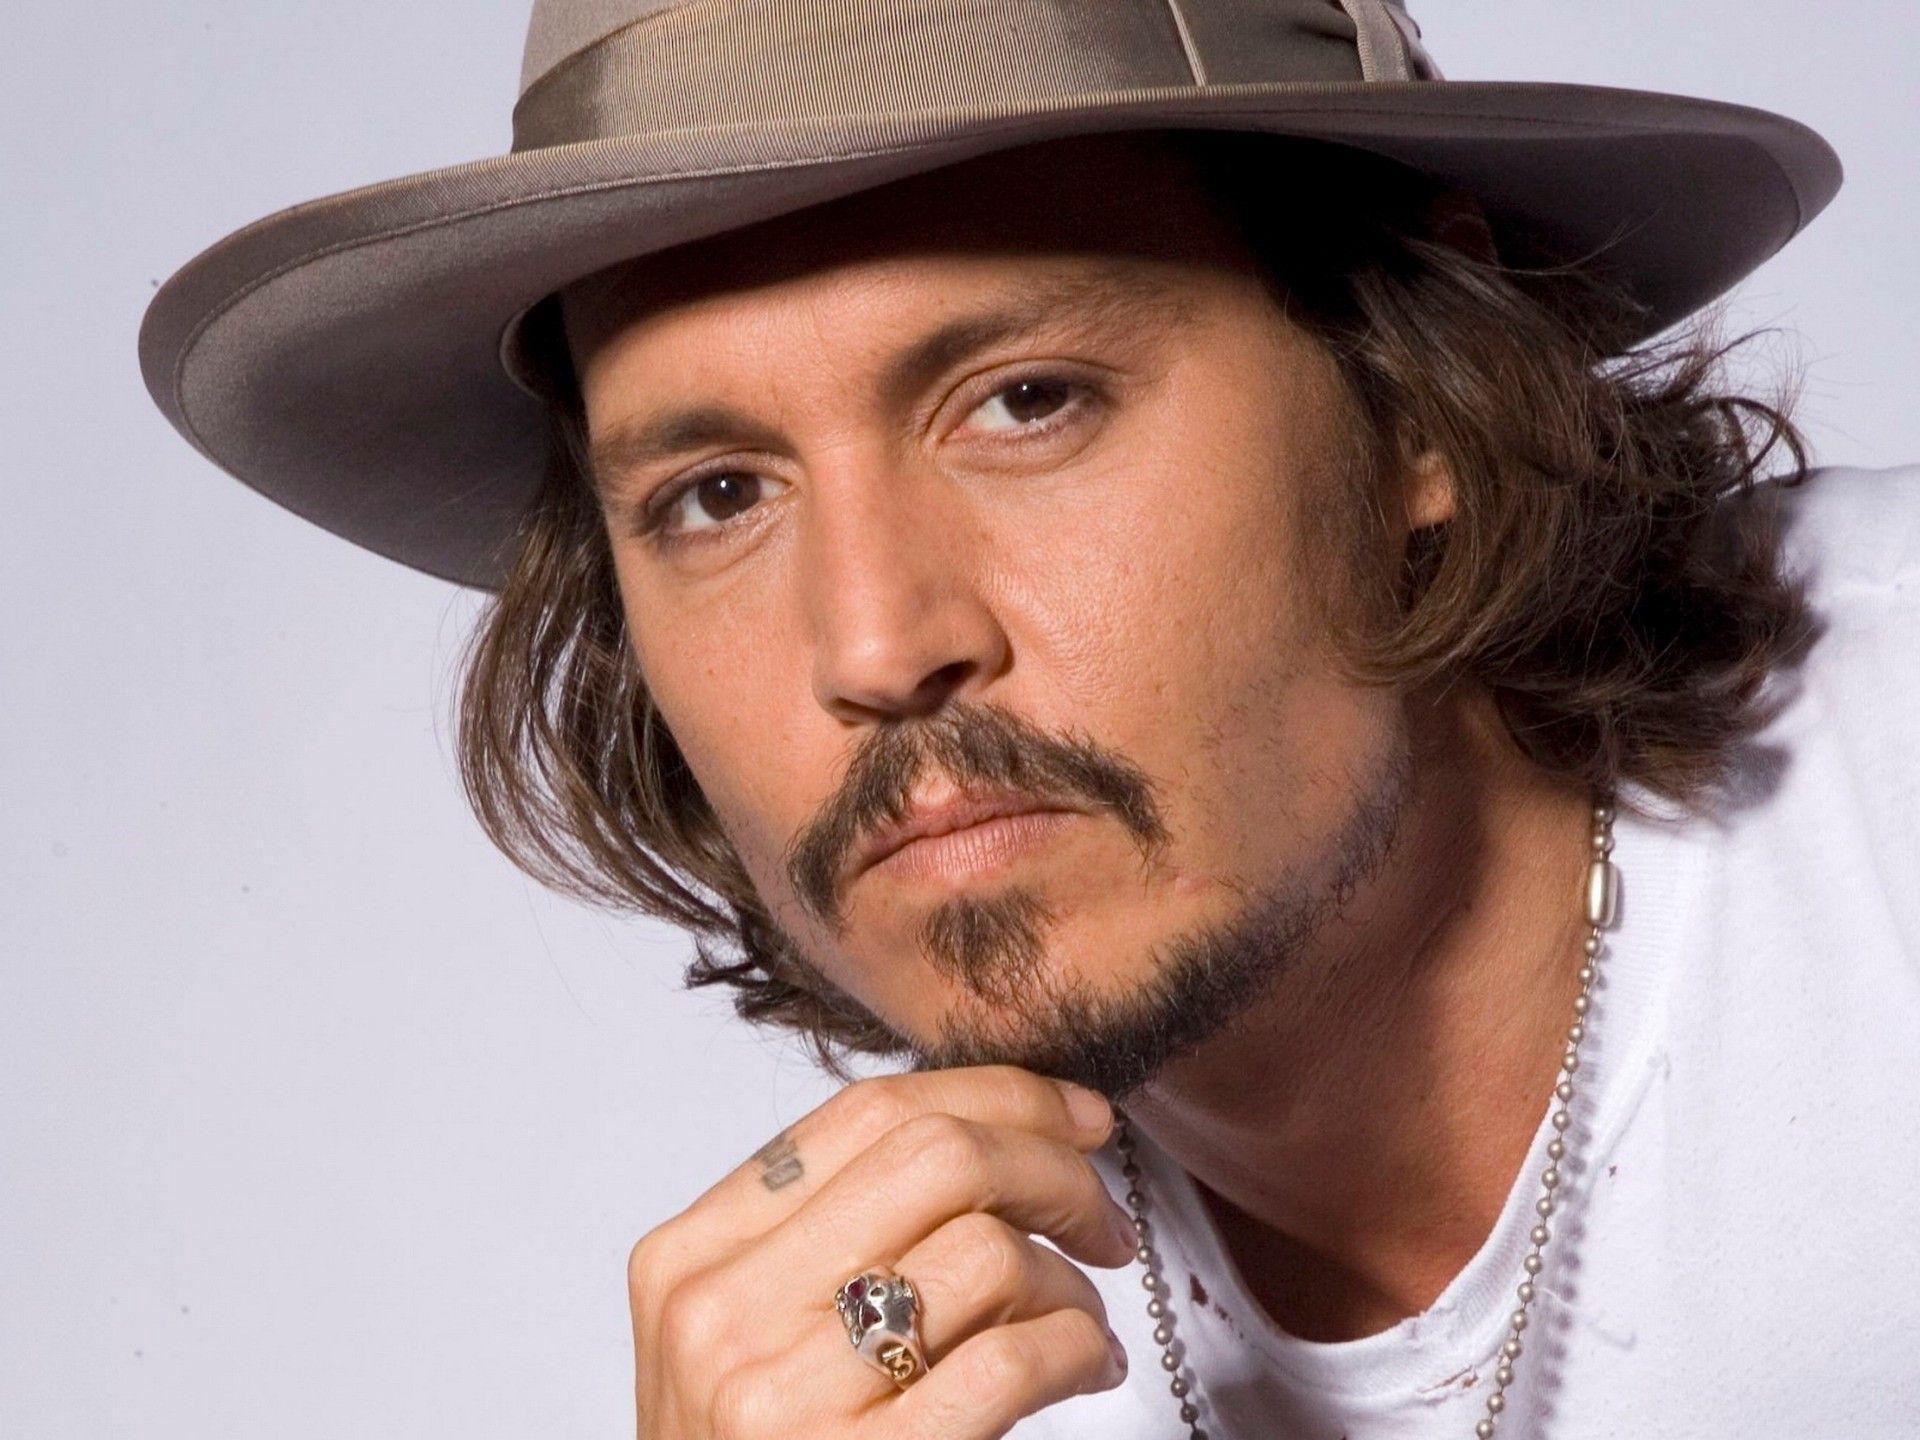 Free Download HD Wallpaper of Hollywood actor Johnny Depp